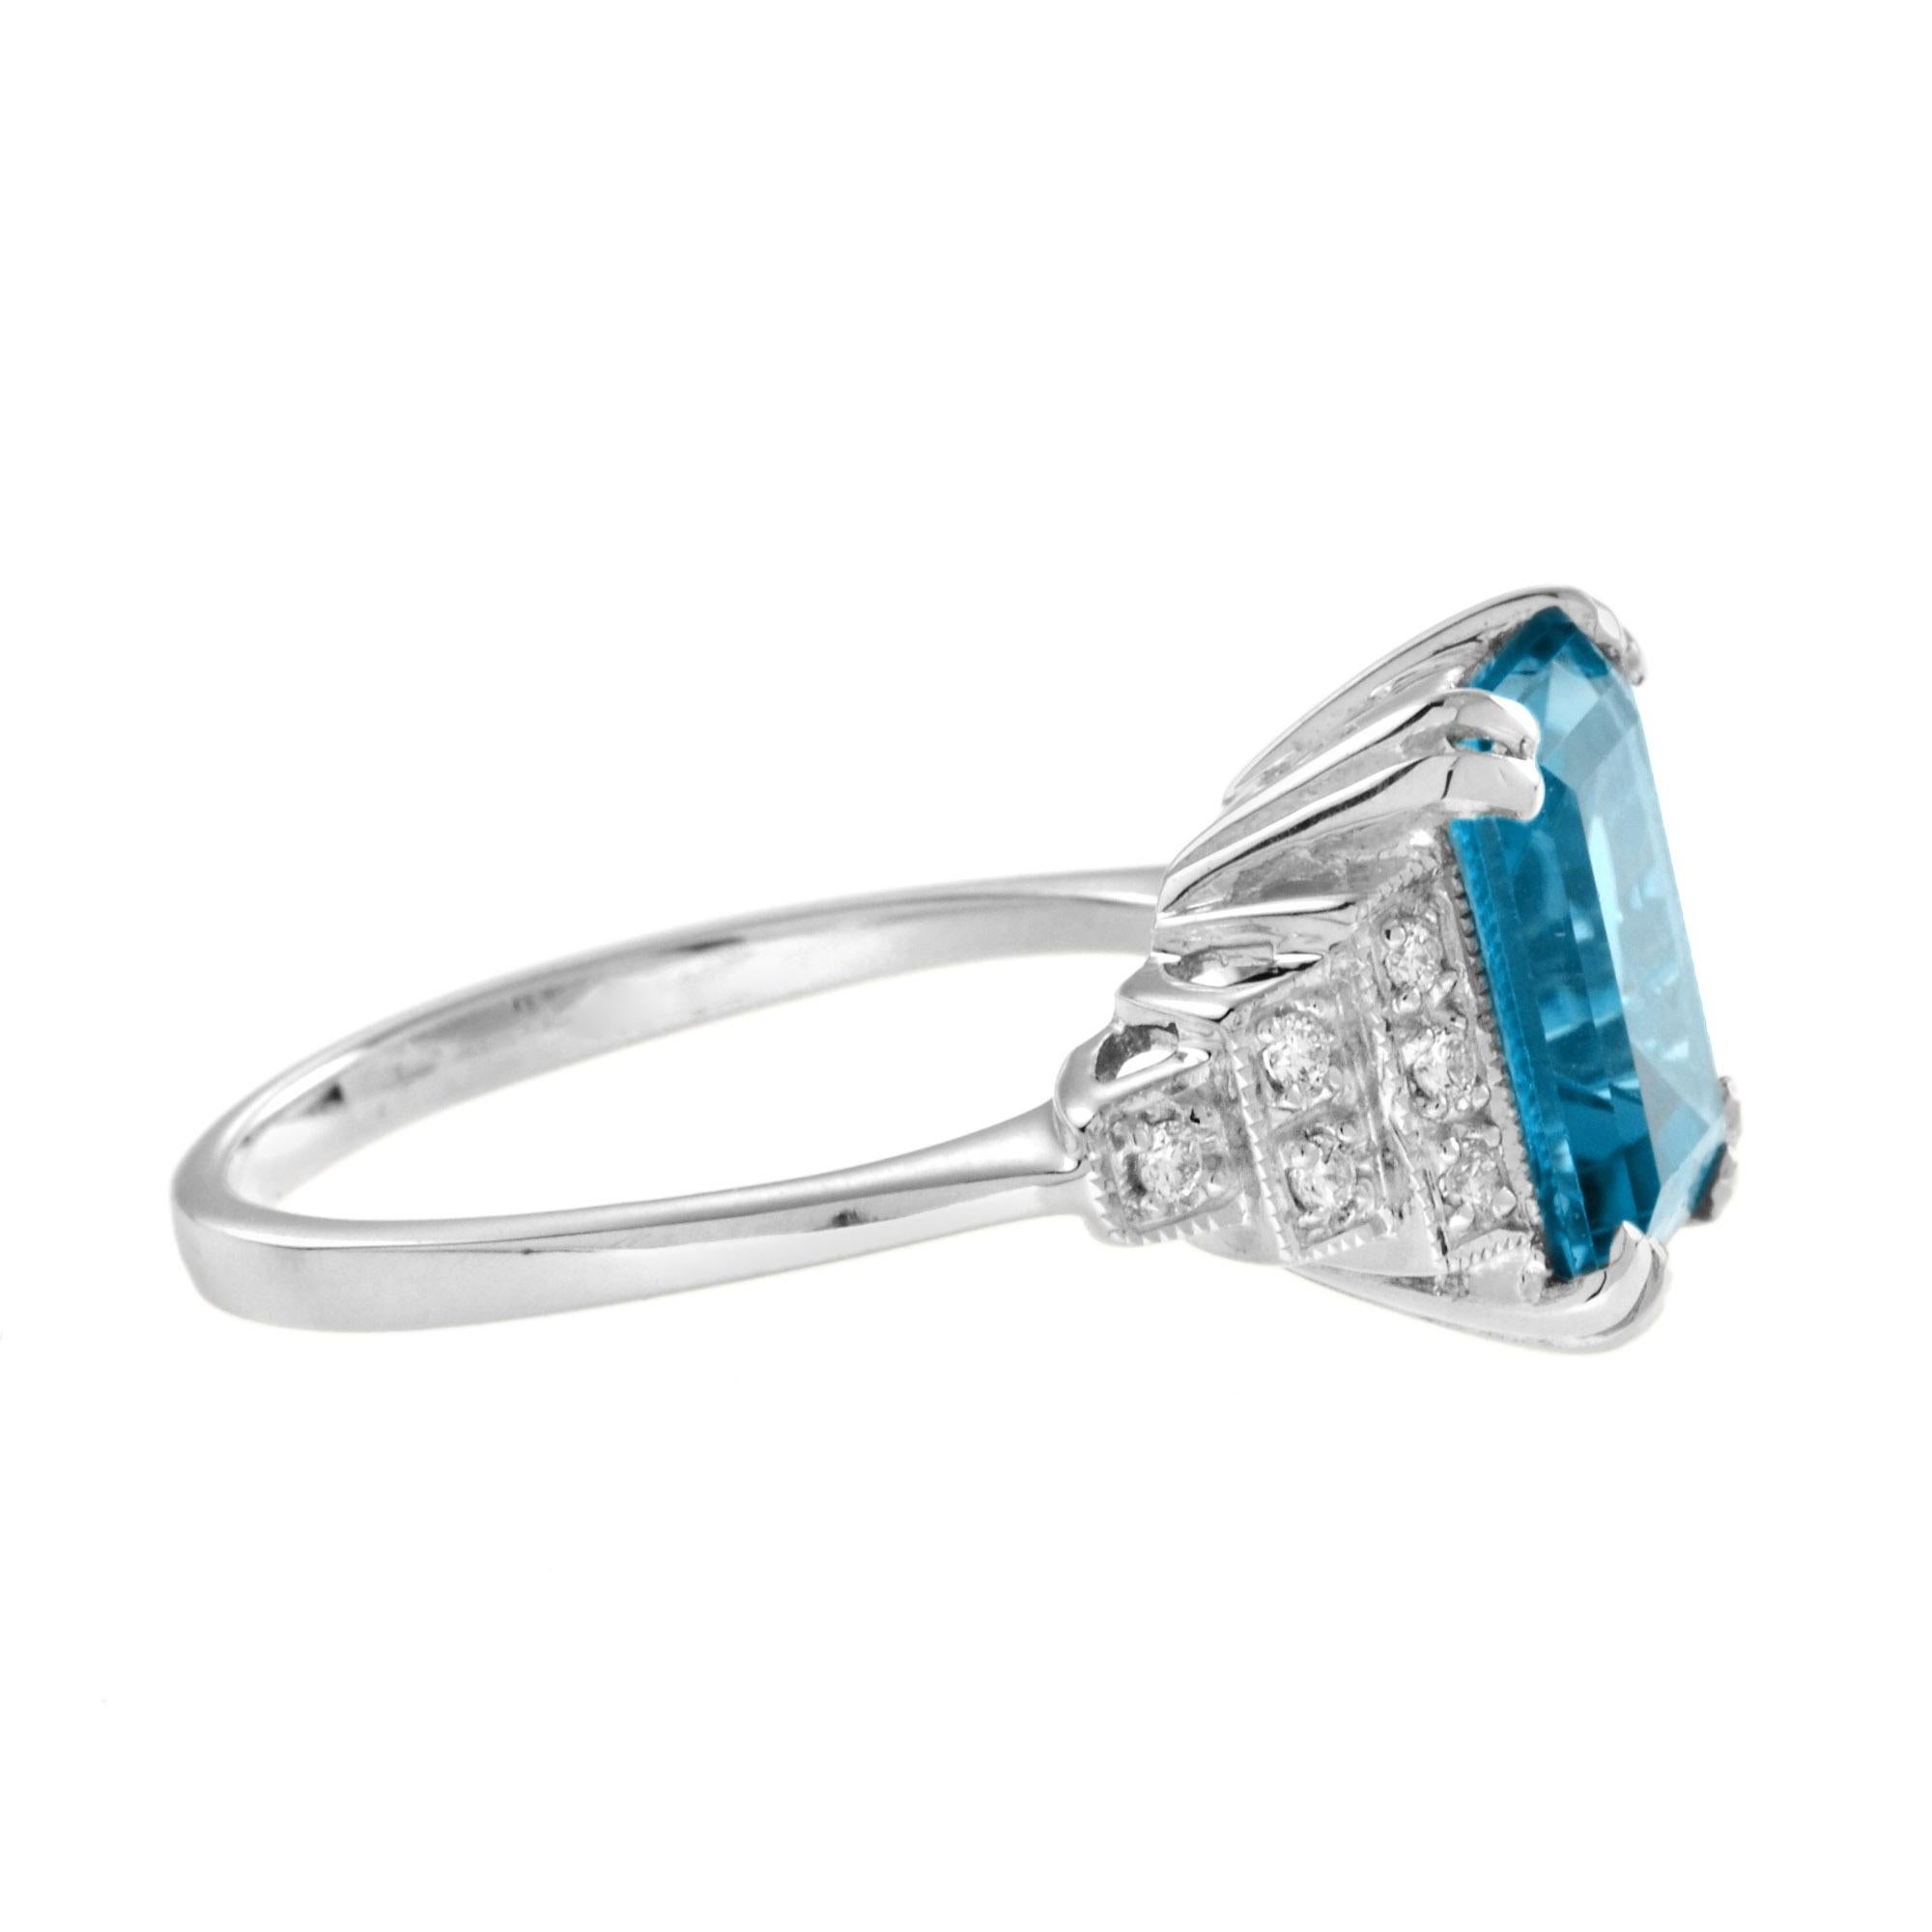 For Sale:  Emerald Cut London Blue Topaz and Step Diamond Engagement Ring in 18K White Gold 4